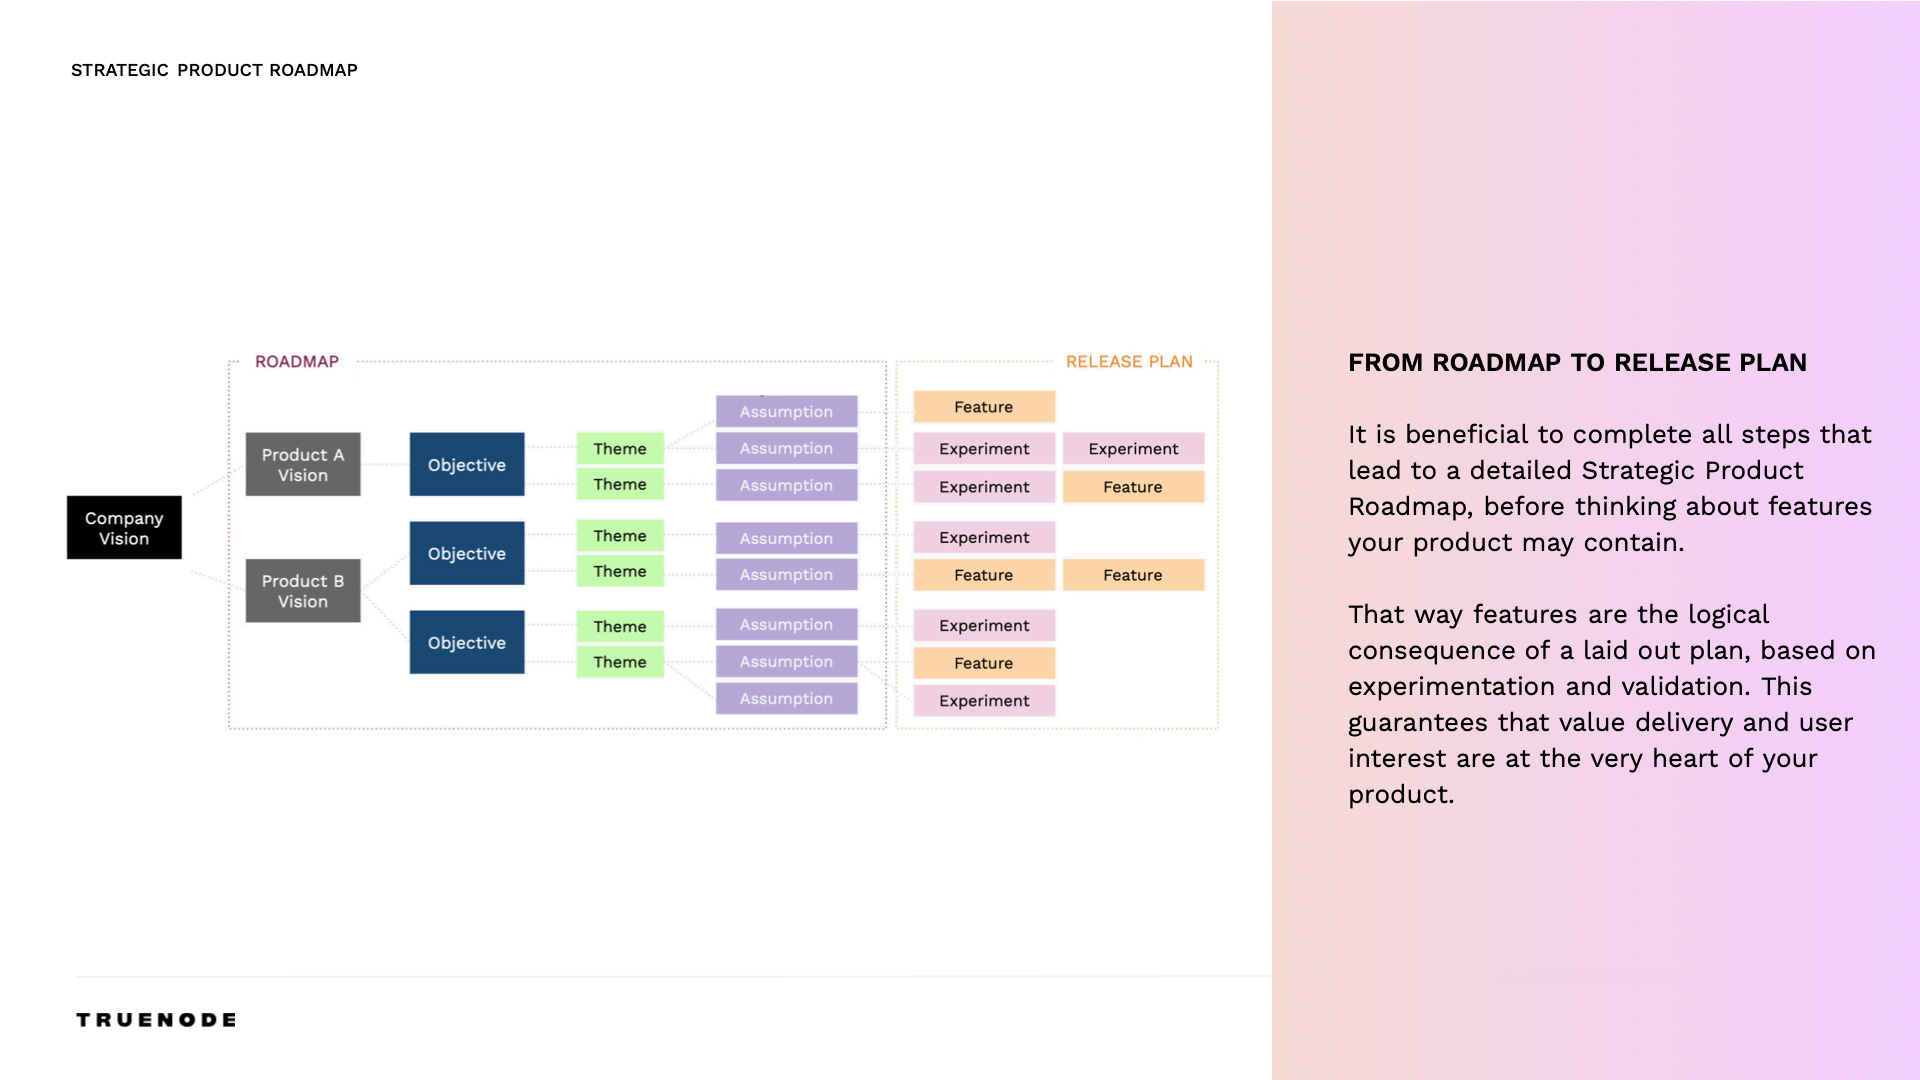 From the product roadmap to the release plan